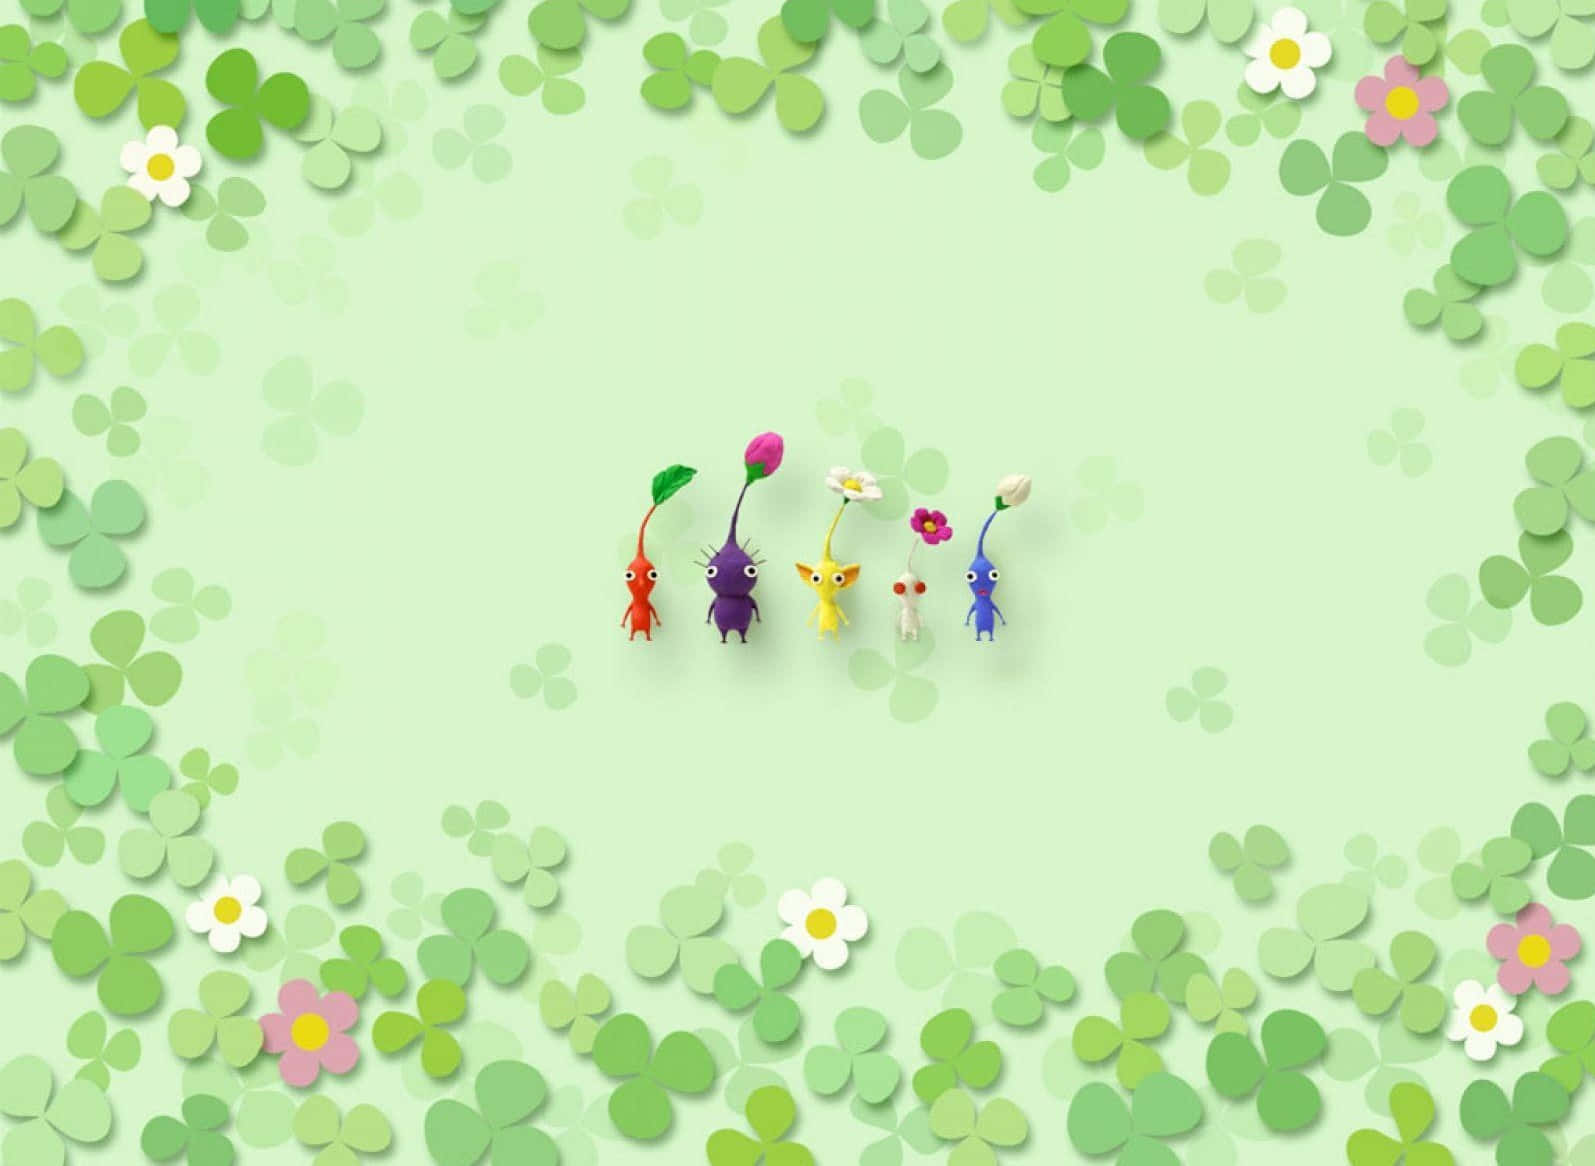 Pikmin Characterson Floral Background Wallpaper